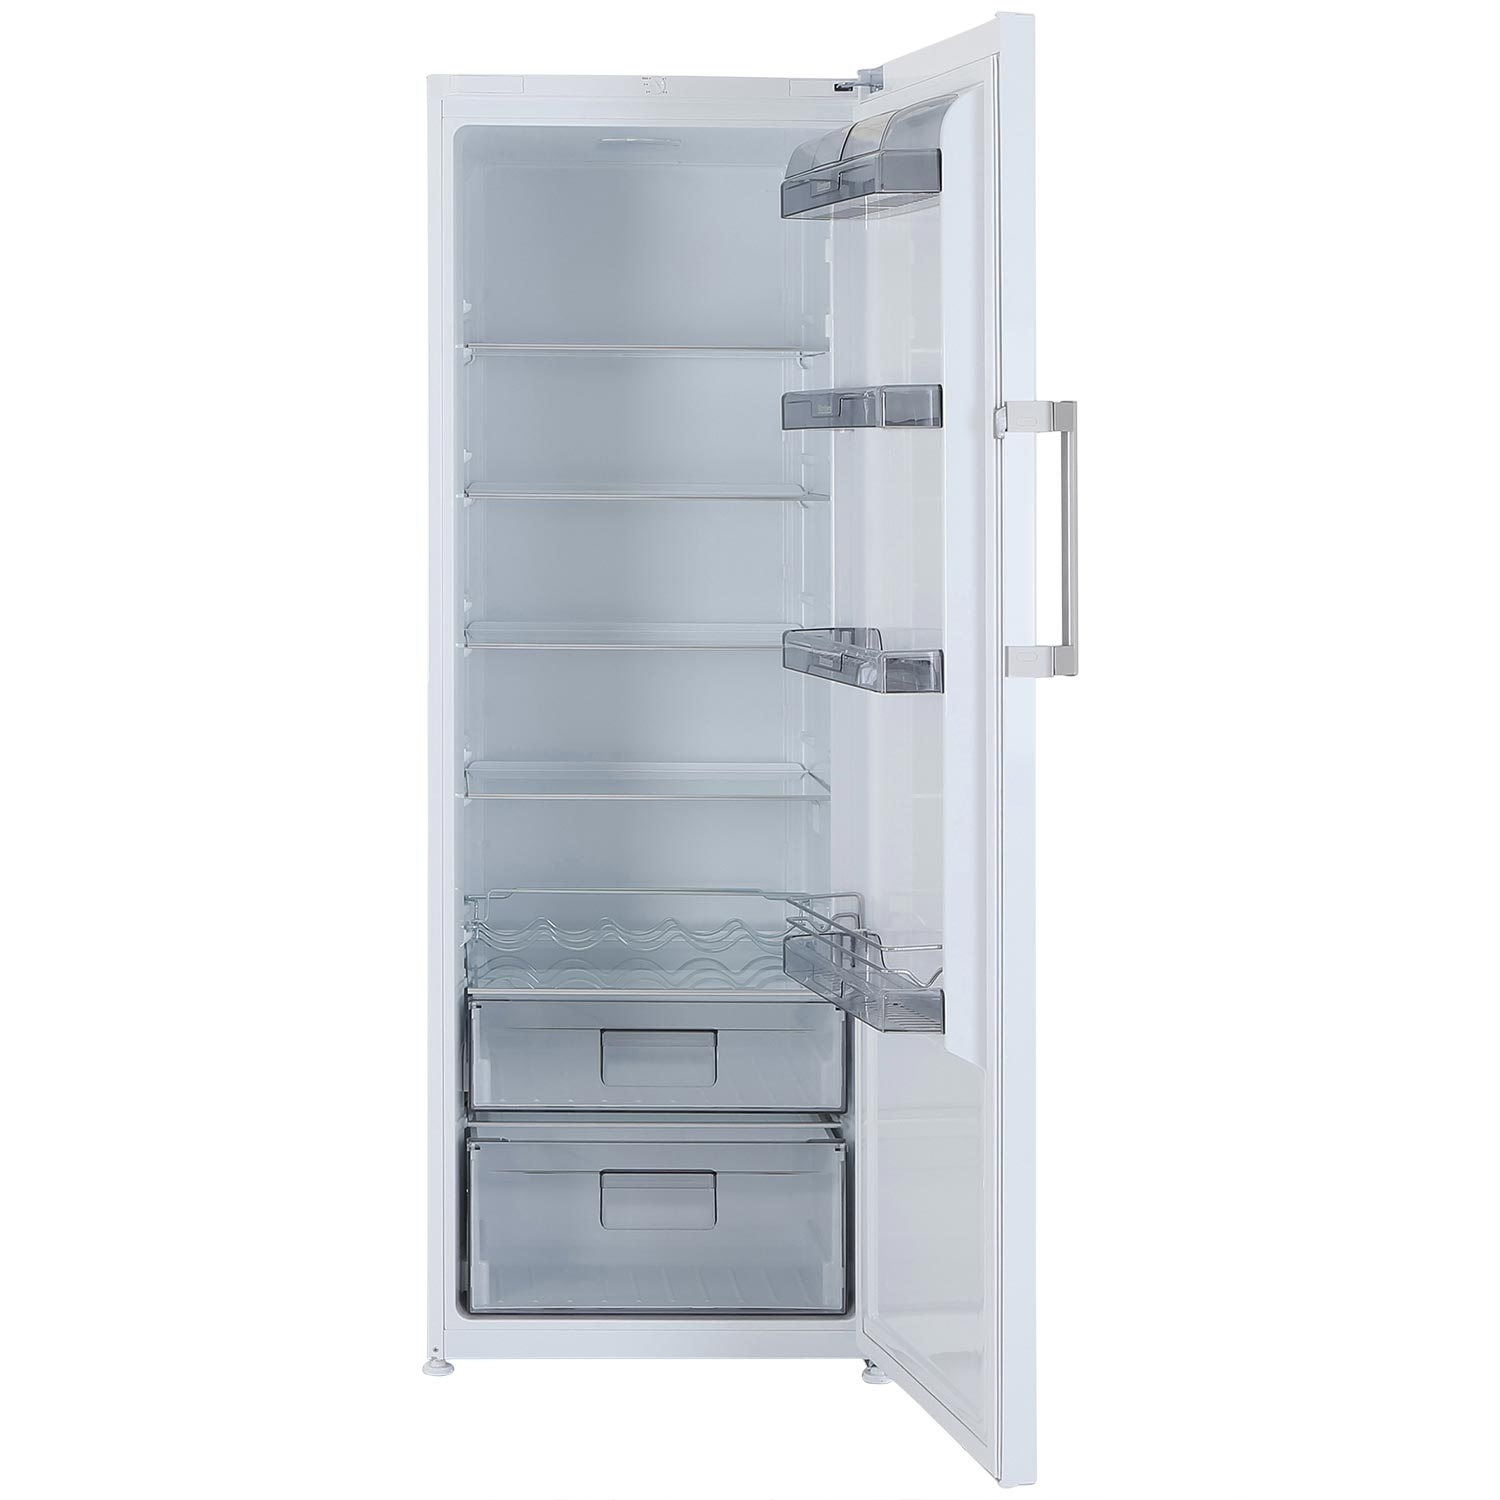 Blomberg Larder - White - A+ Energy Rated - 1